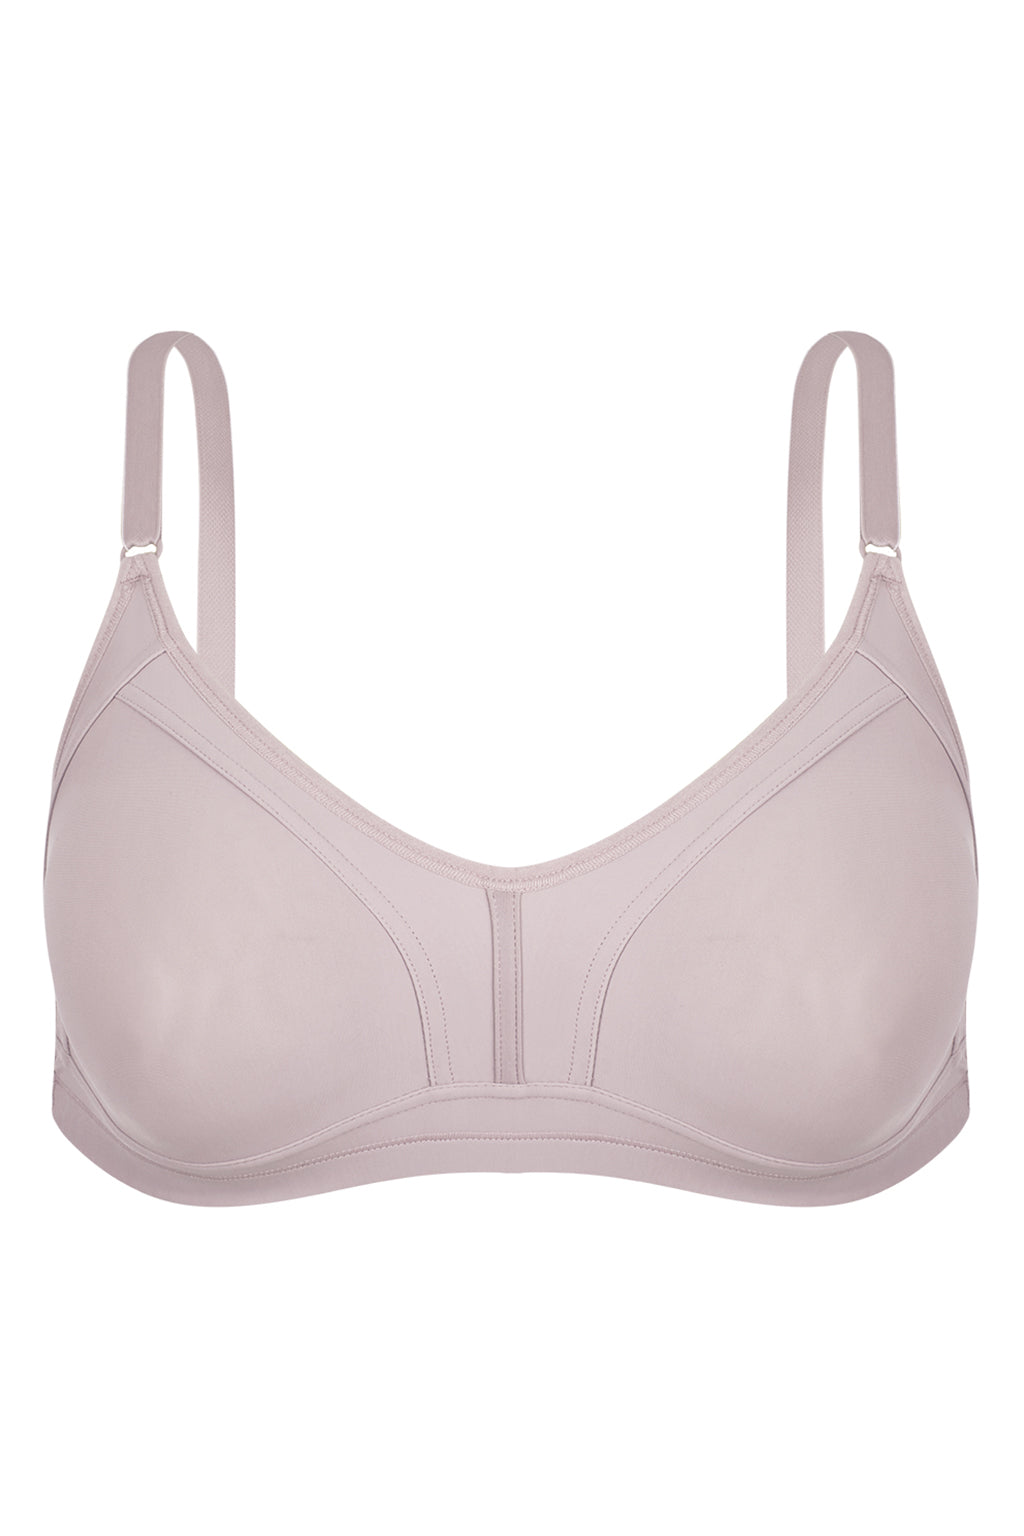 Plus Size Firmer Rimless Ultra Molded Support Bra